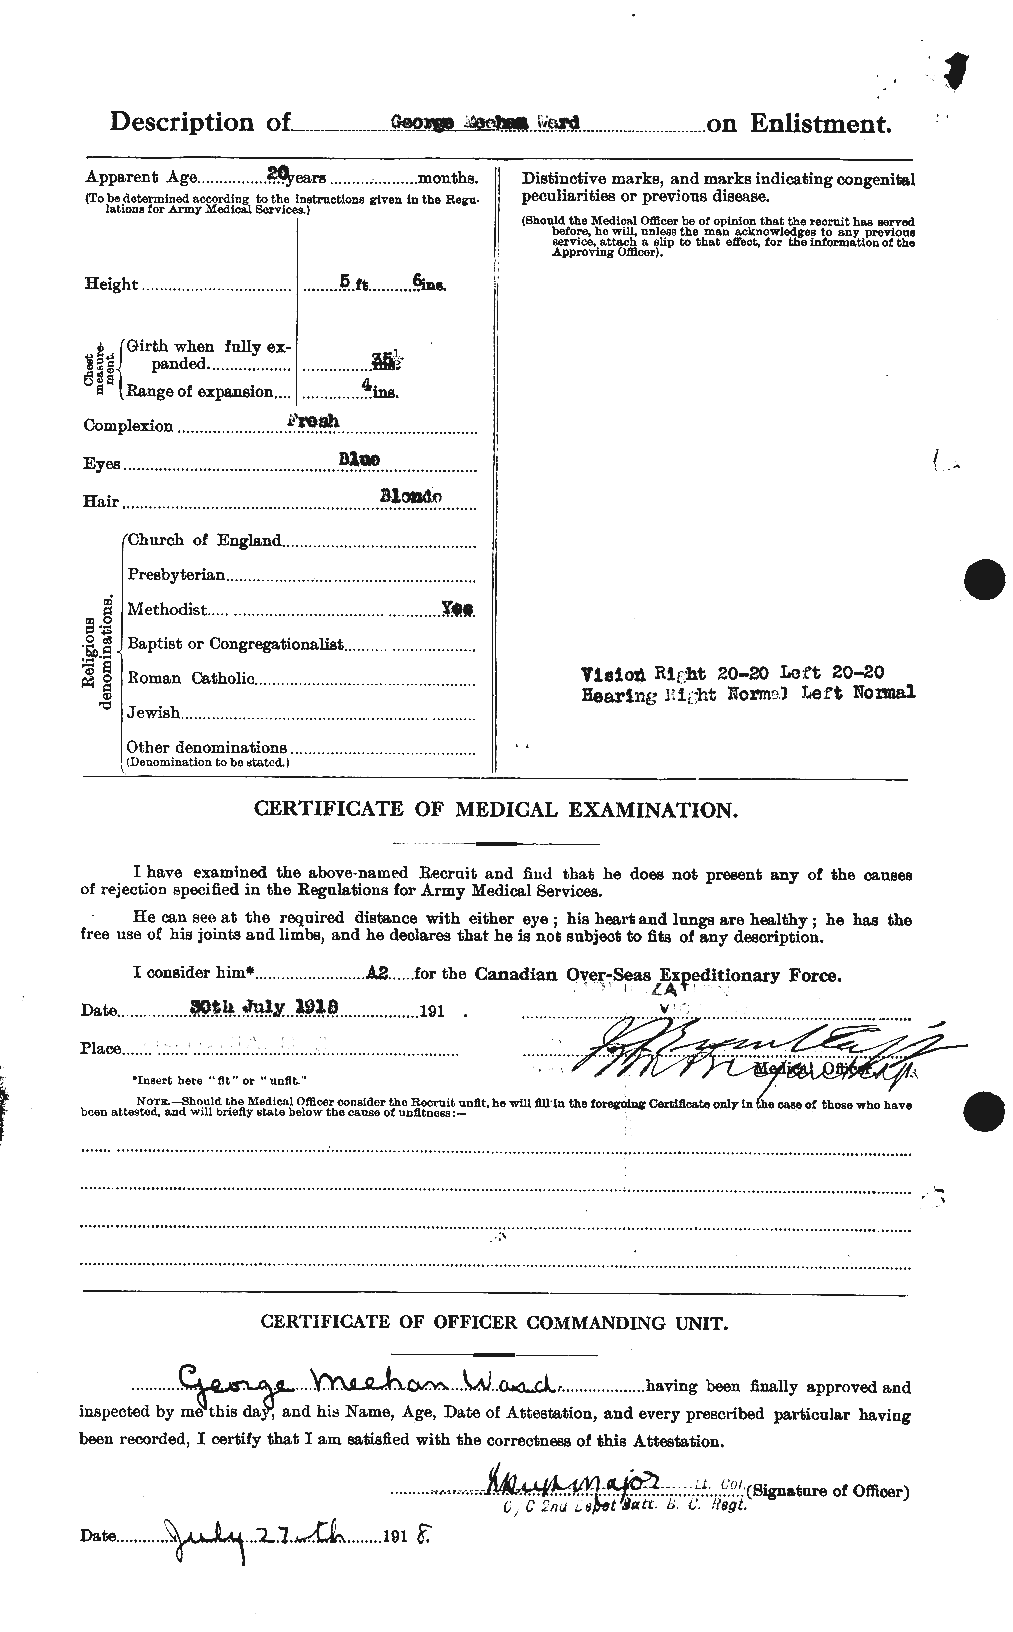 Personnel Records of the First World War - CEF 657779b